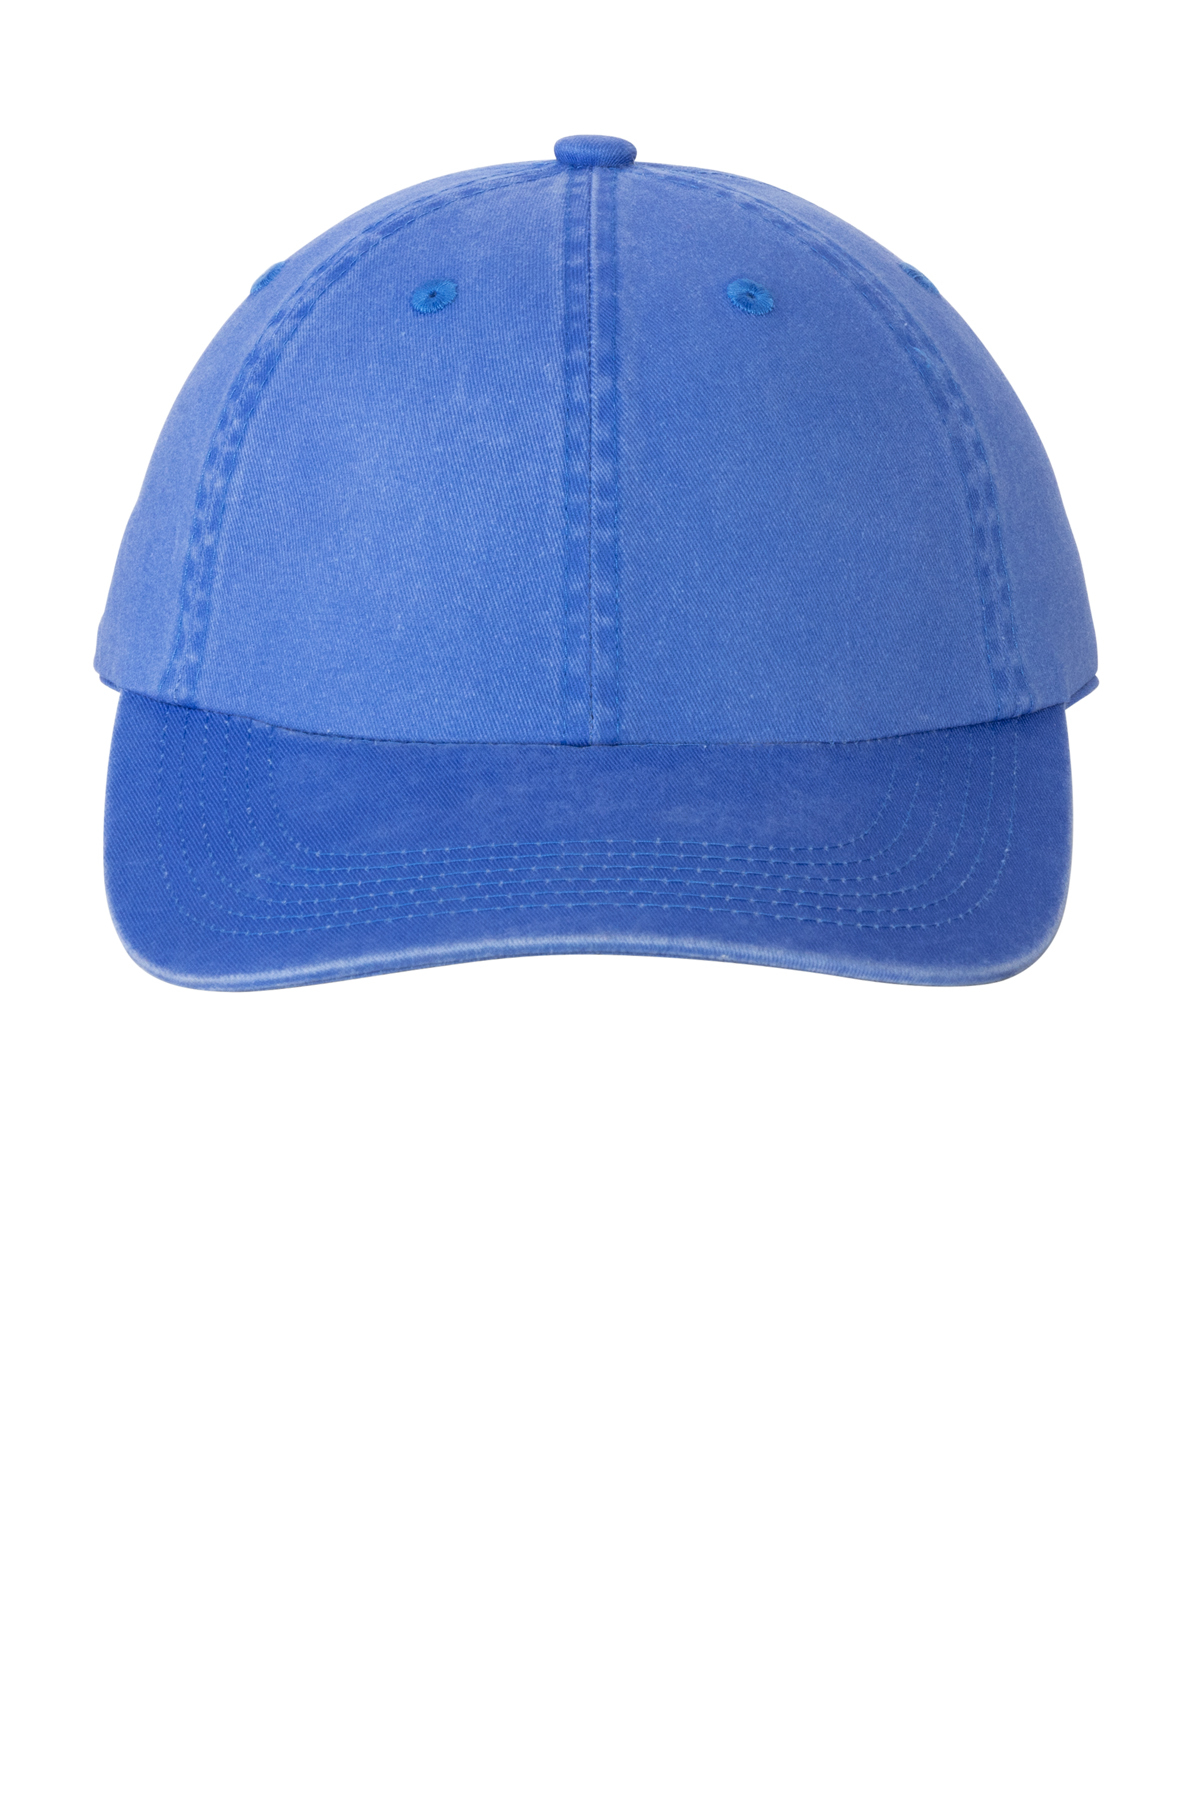 Brooks Brothers Faded Color Baseball Cap, $18, Brooks Brothers